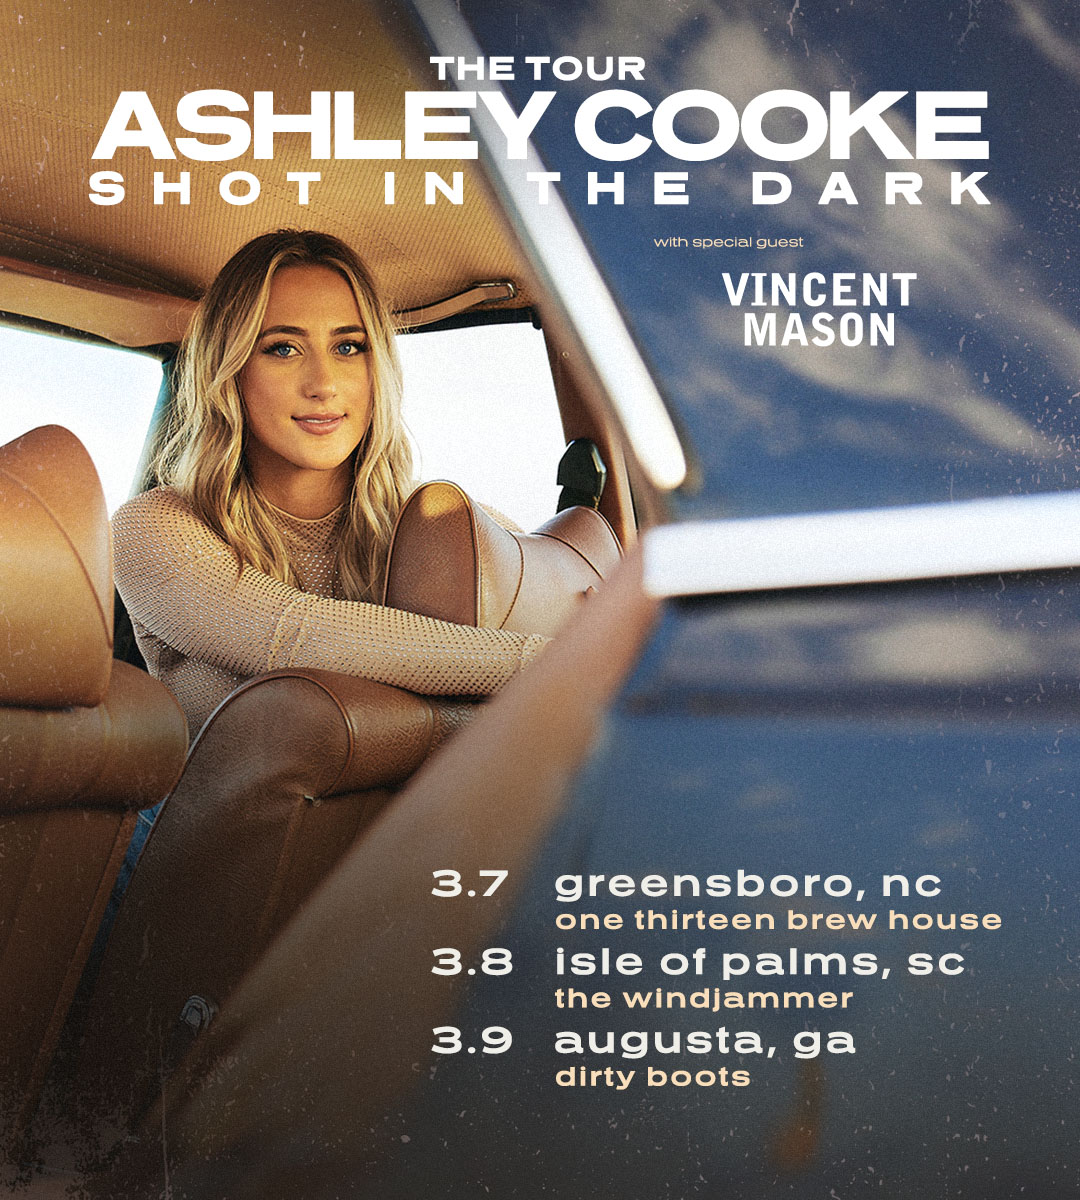 we just couldn’t get enough of the “shot in the dark tour” so… we’re adding more shows to 2024 👀 starting with these 3! can’t wait to get back out there with @_vincentmason. see you soon! vip on sale thursday 1/25 and general tickets on sale friday 1/26 at 10am local.…